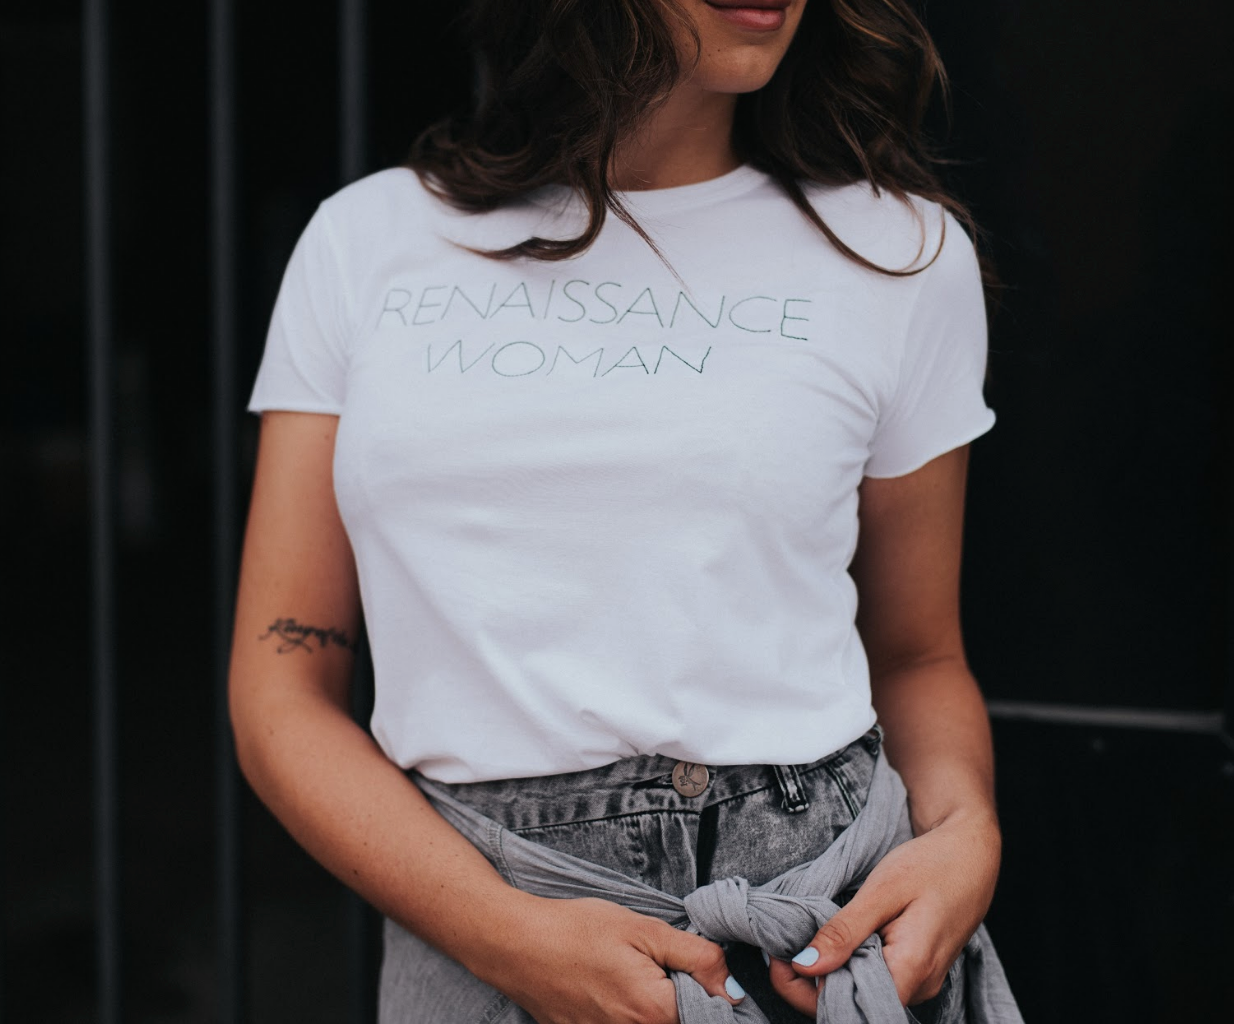 Renaissance Woman, Baby Girl Tee - Also, Freedom